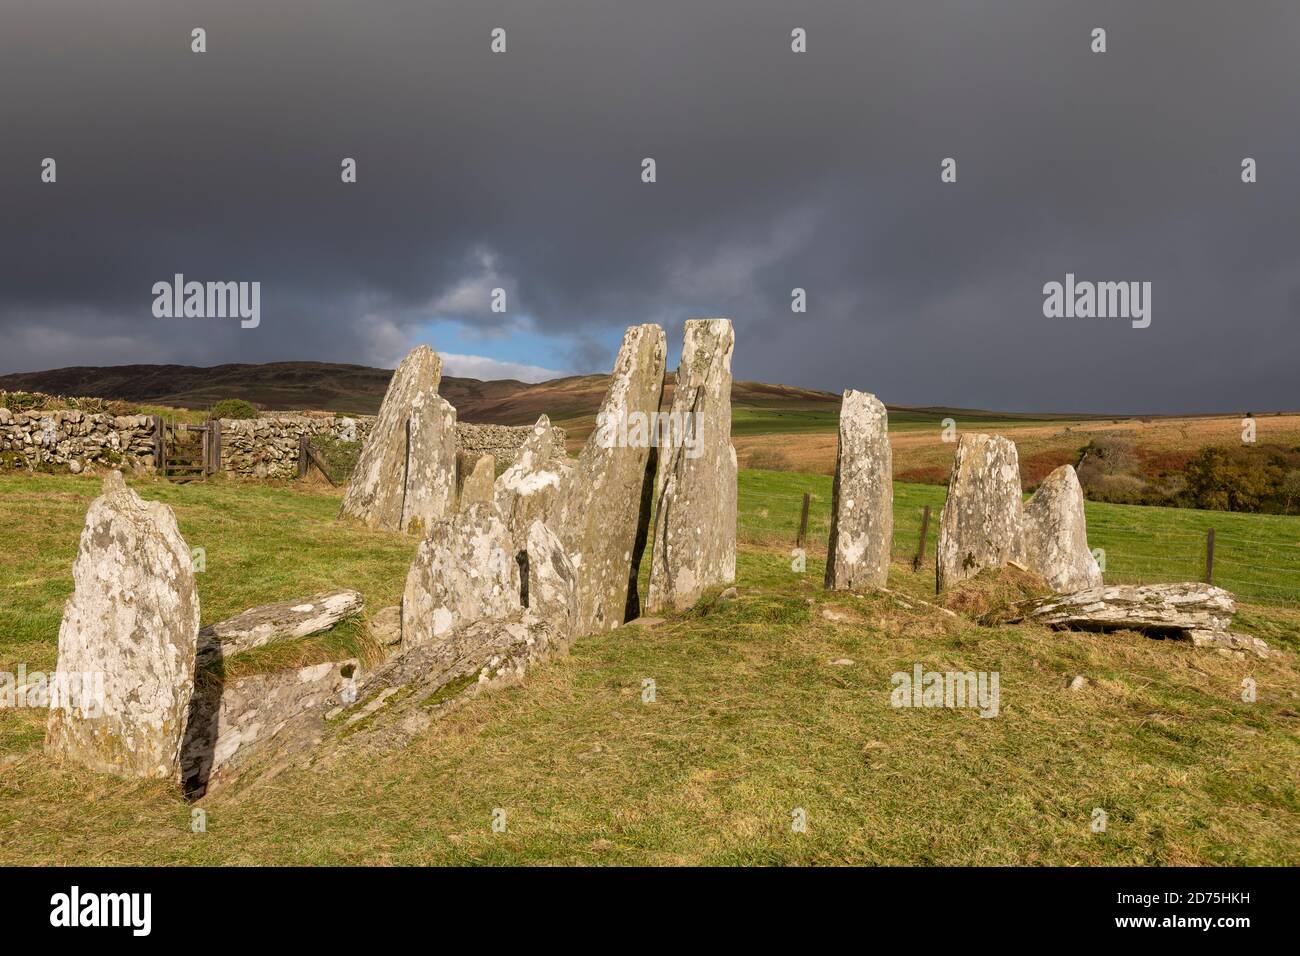 Cairn Holy 1 set against a dark stormy looking sky Stock Photo